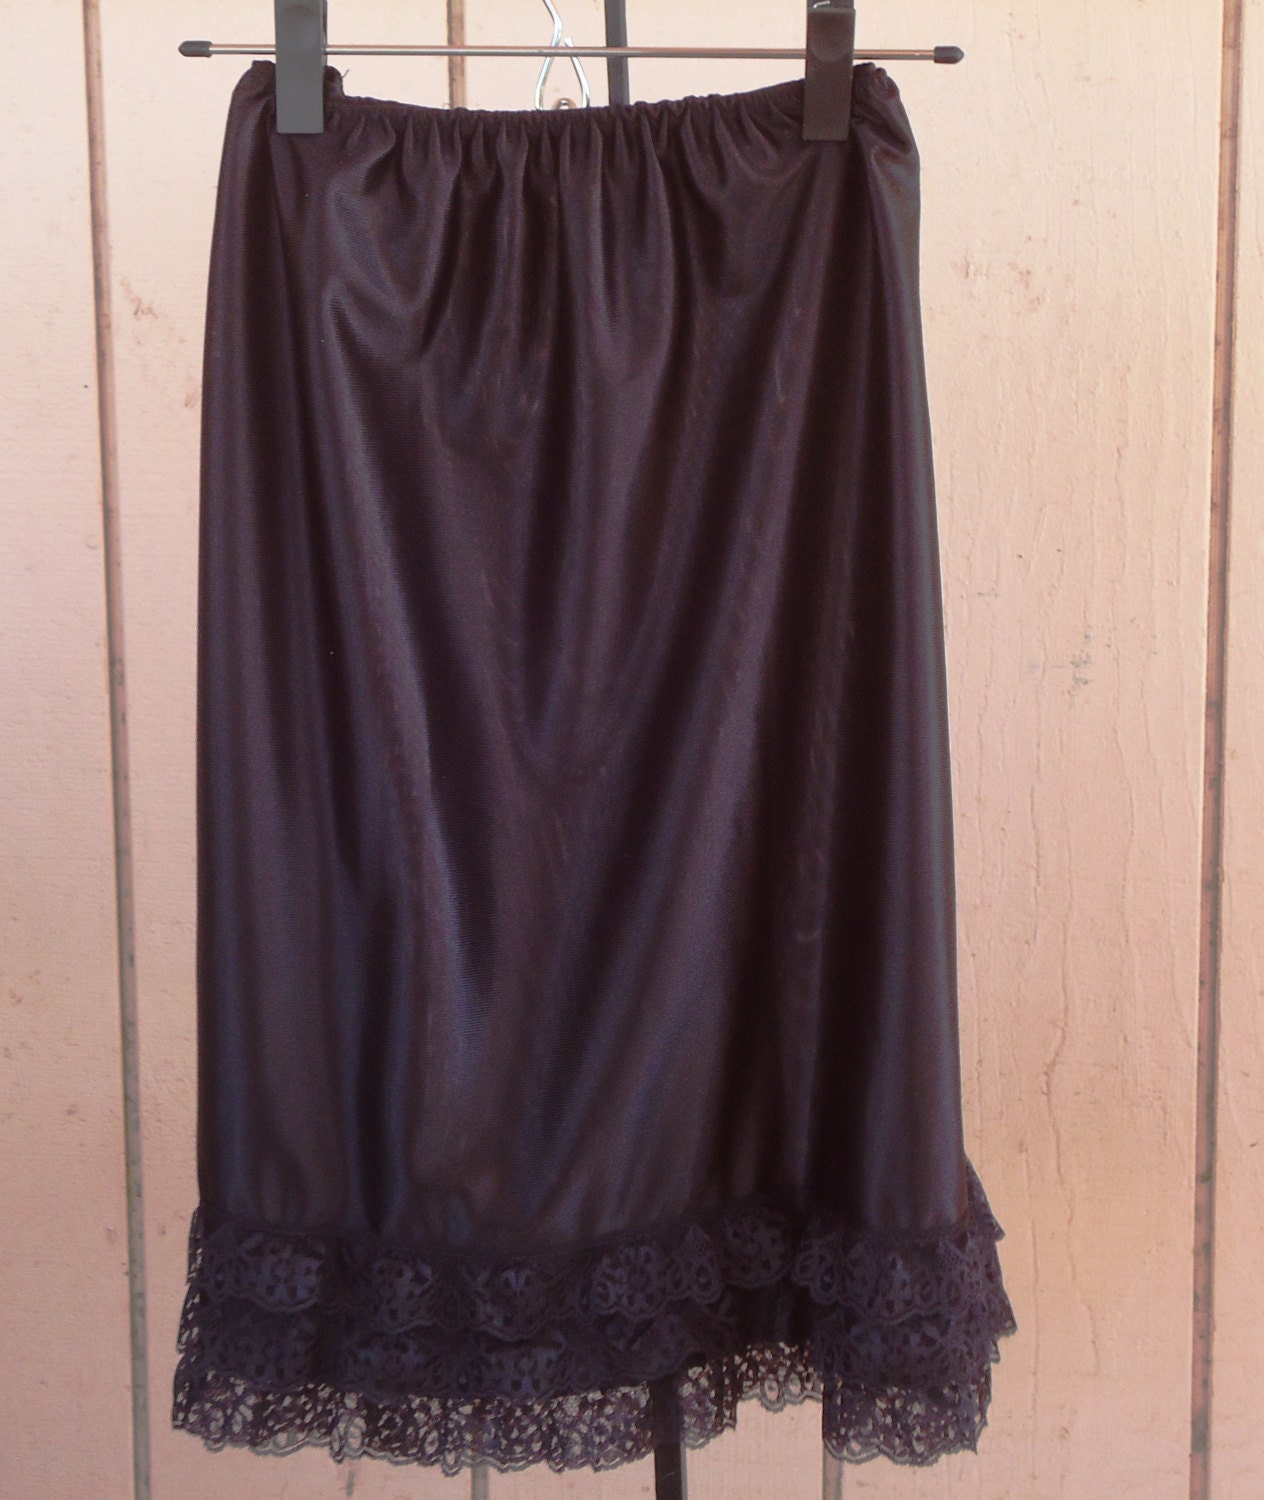 Black slip extender with three tiered layered lace.